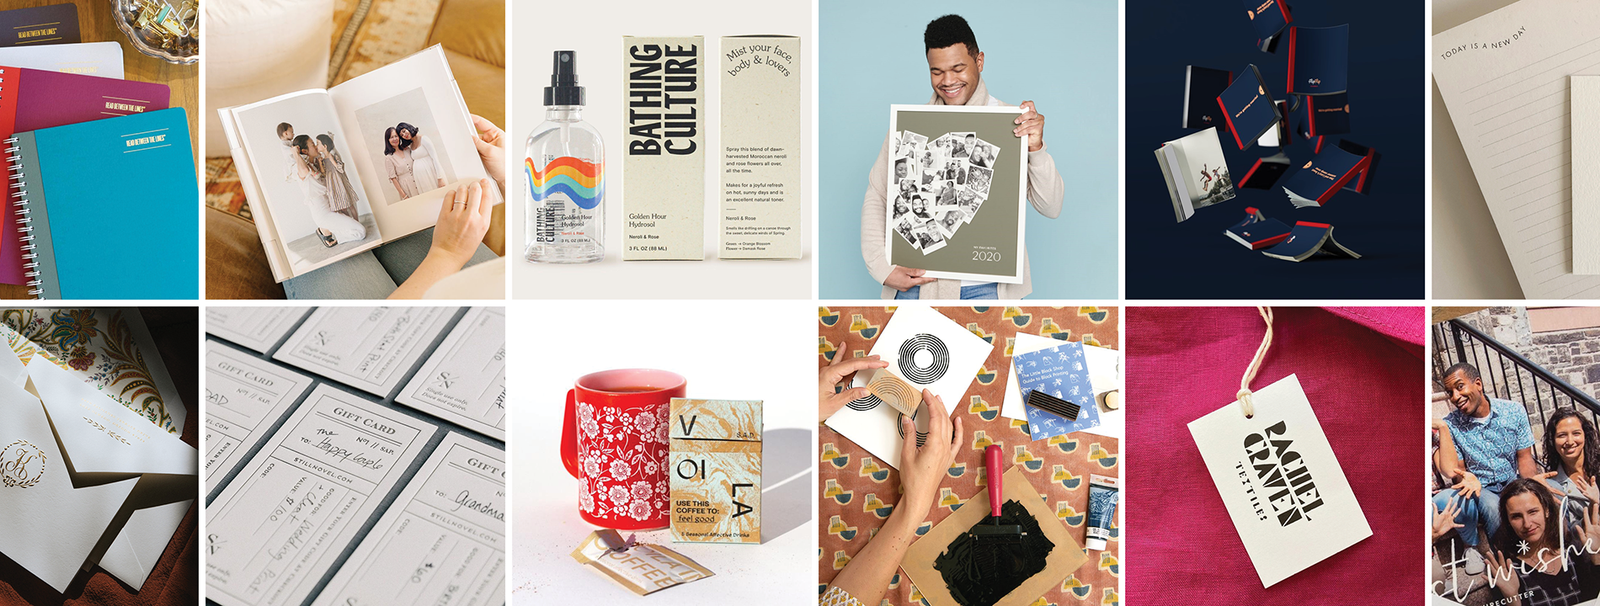 Collage showing images of gifts featured in the Gift Guide